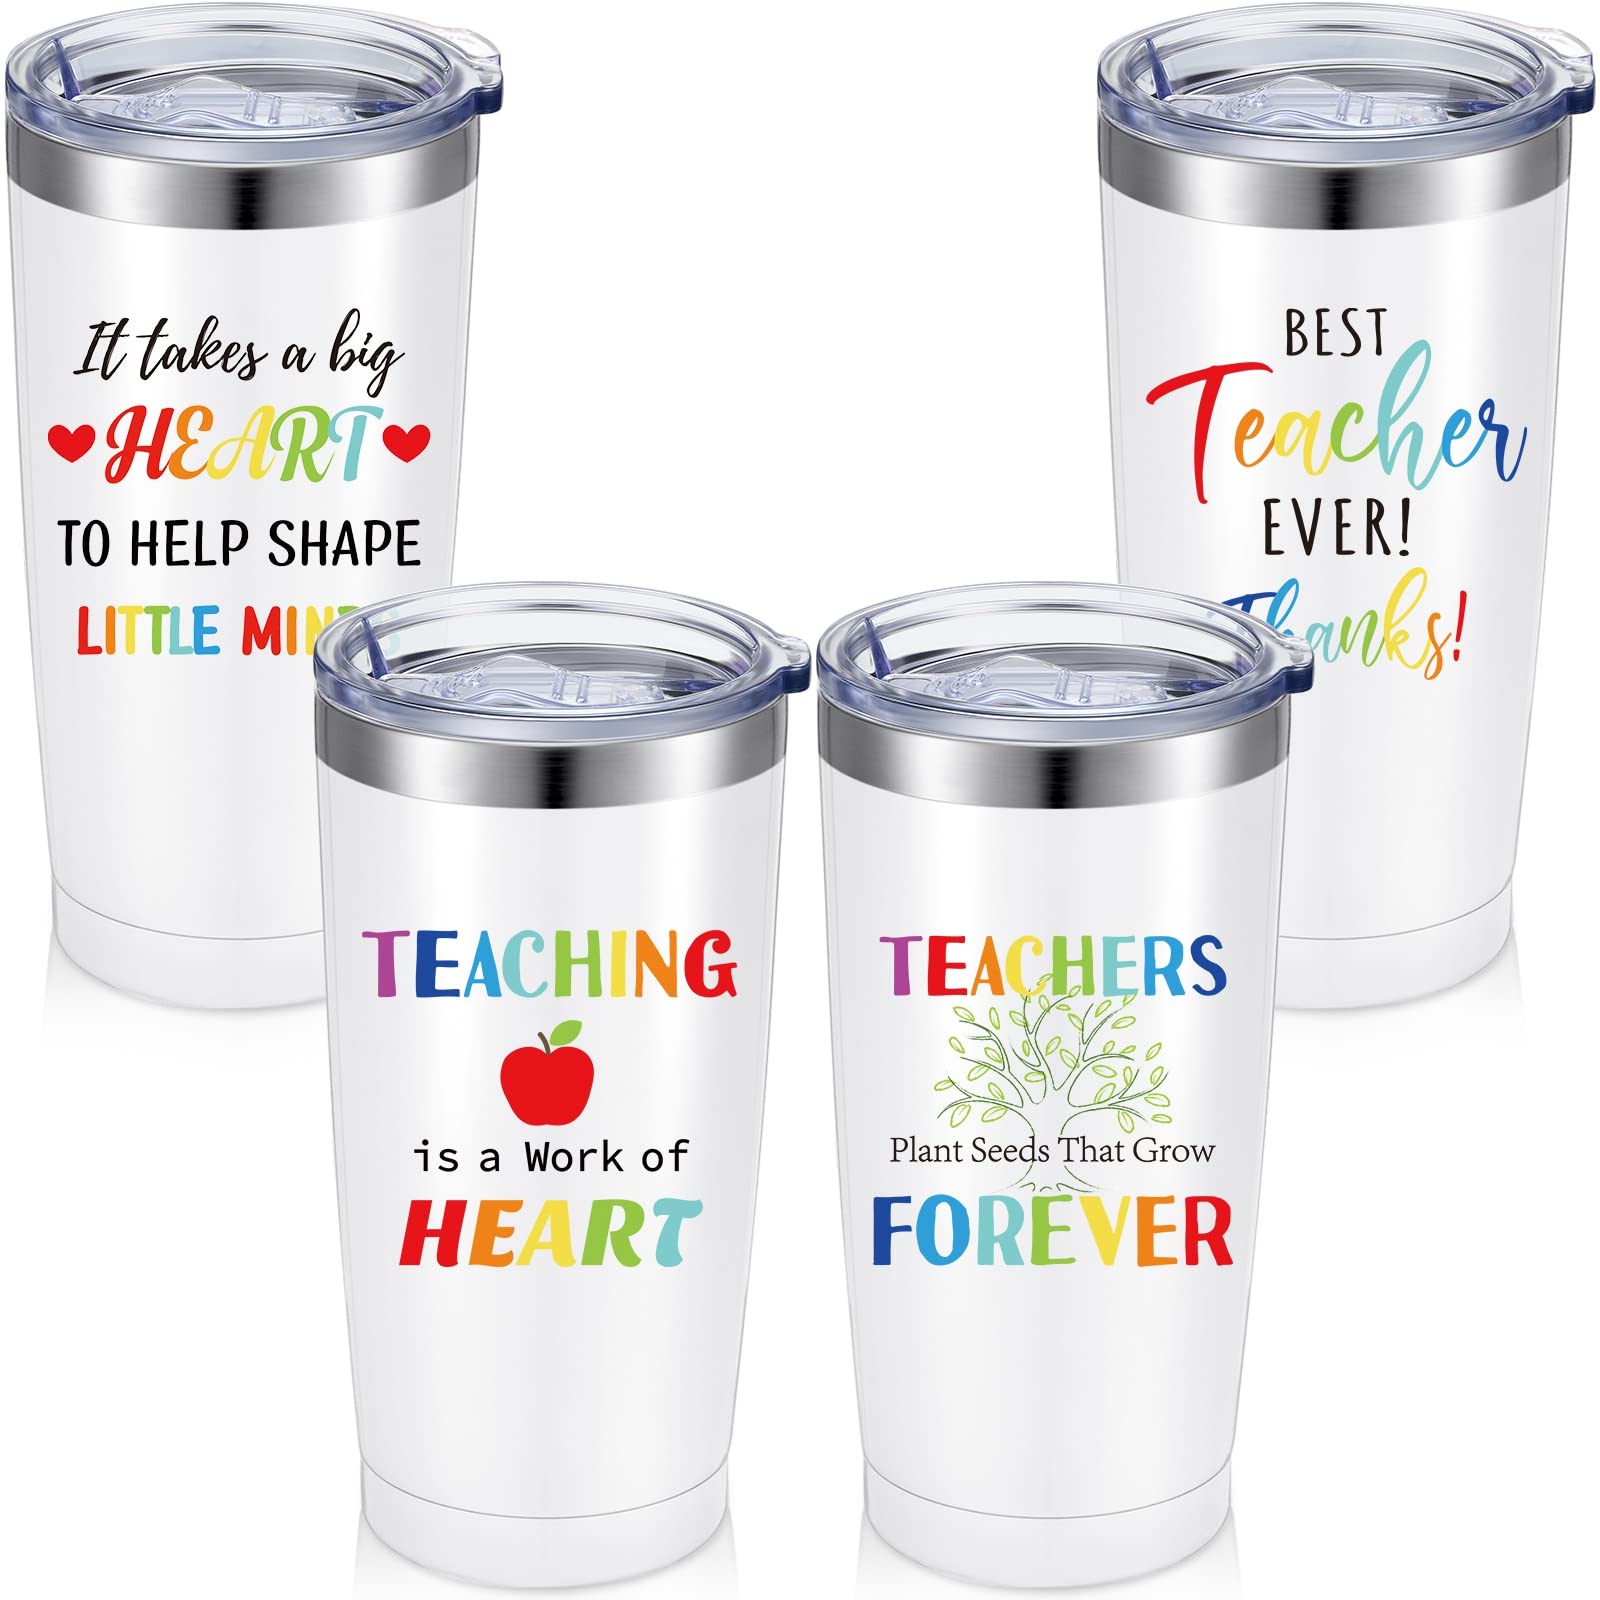 Patelai 4 Pcs Teacher Appreciation Gifts Best Teacher Birthday Gifts Stainless Steel Insulated Tumblers Set Funny Thank You Tumbler Coffee Mugs for Graduation Teachers' Day Present (White)